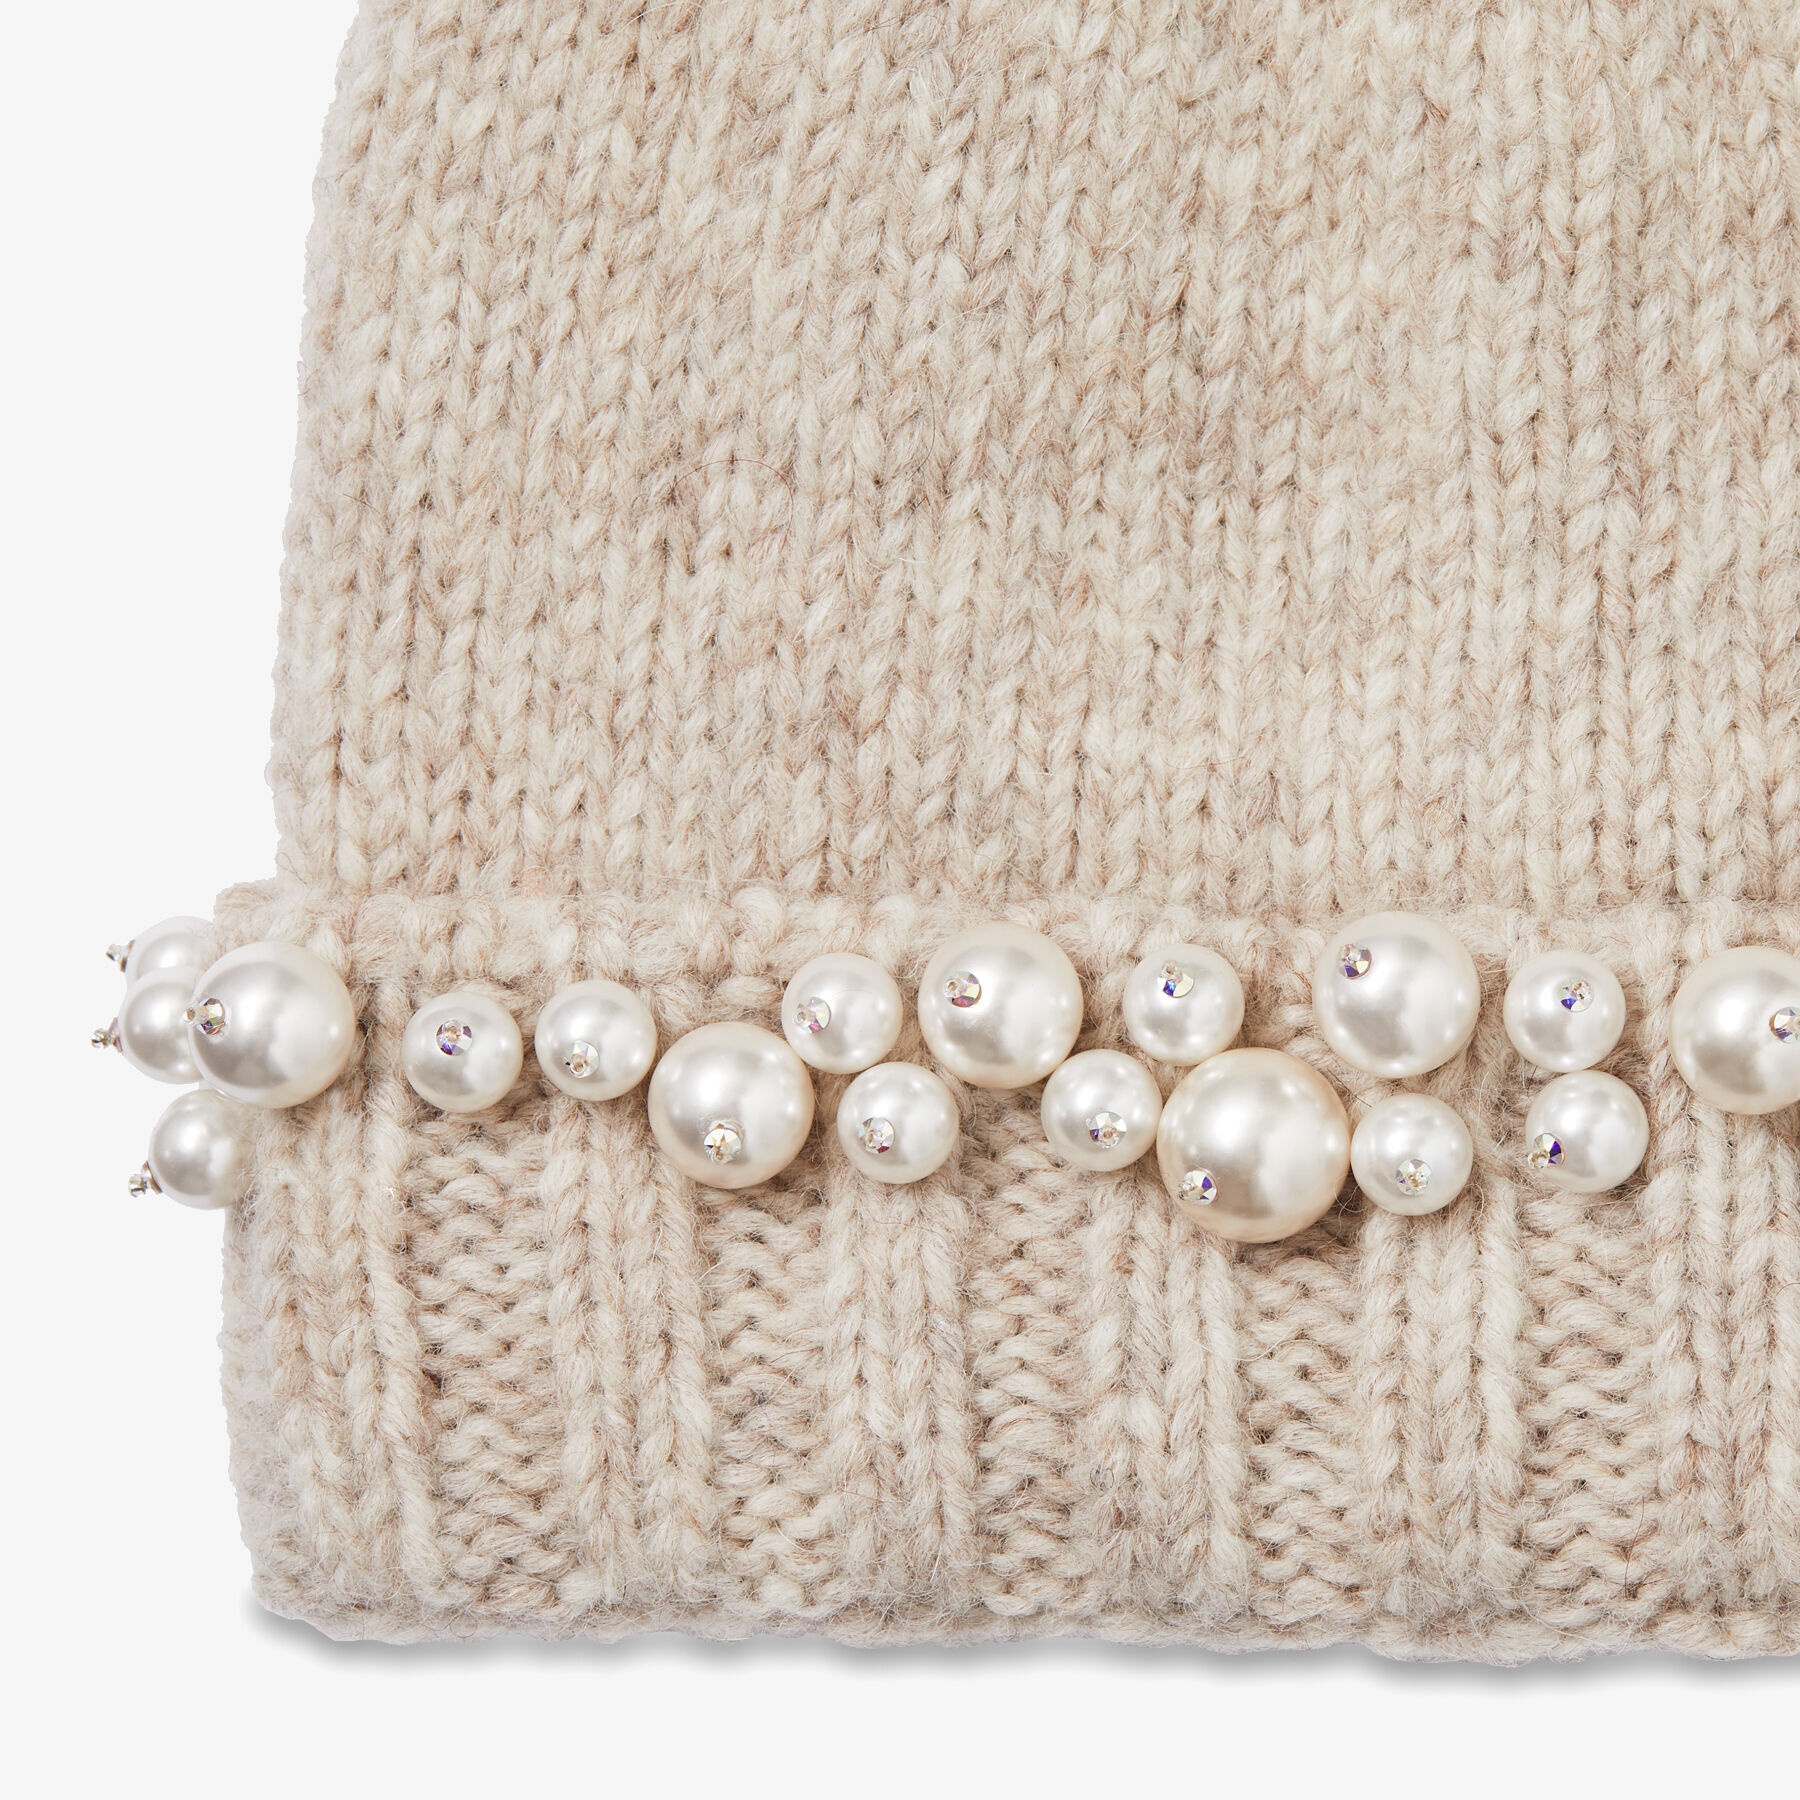 Gerry
Marl Grey Knitted Wool Blend Hat with Pearls - 2